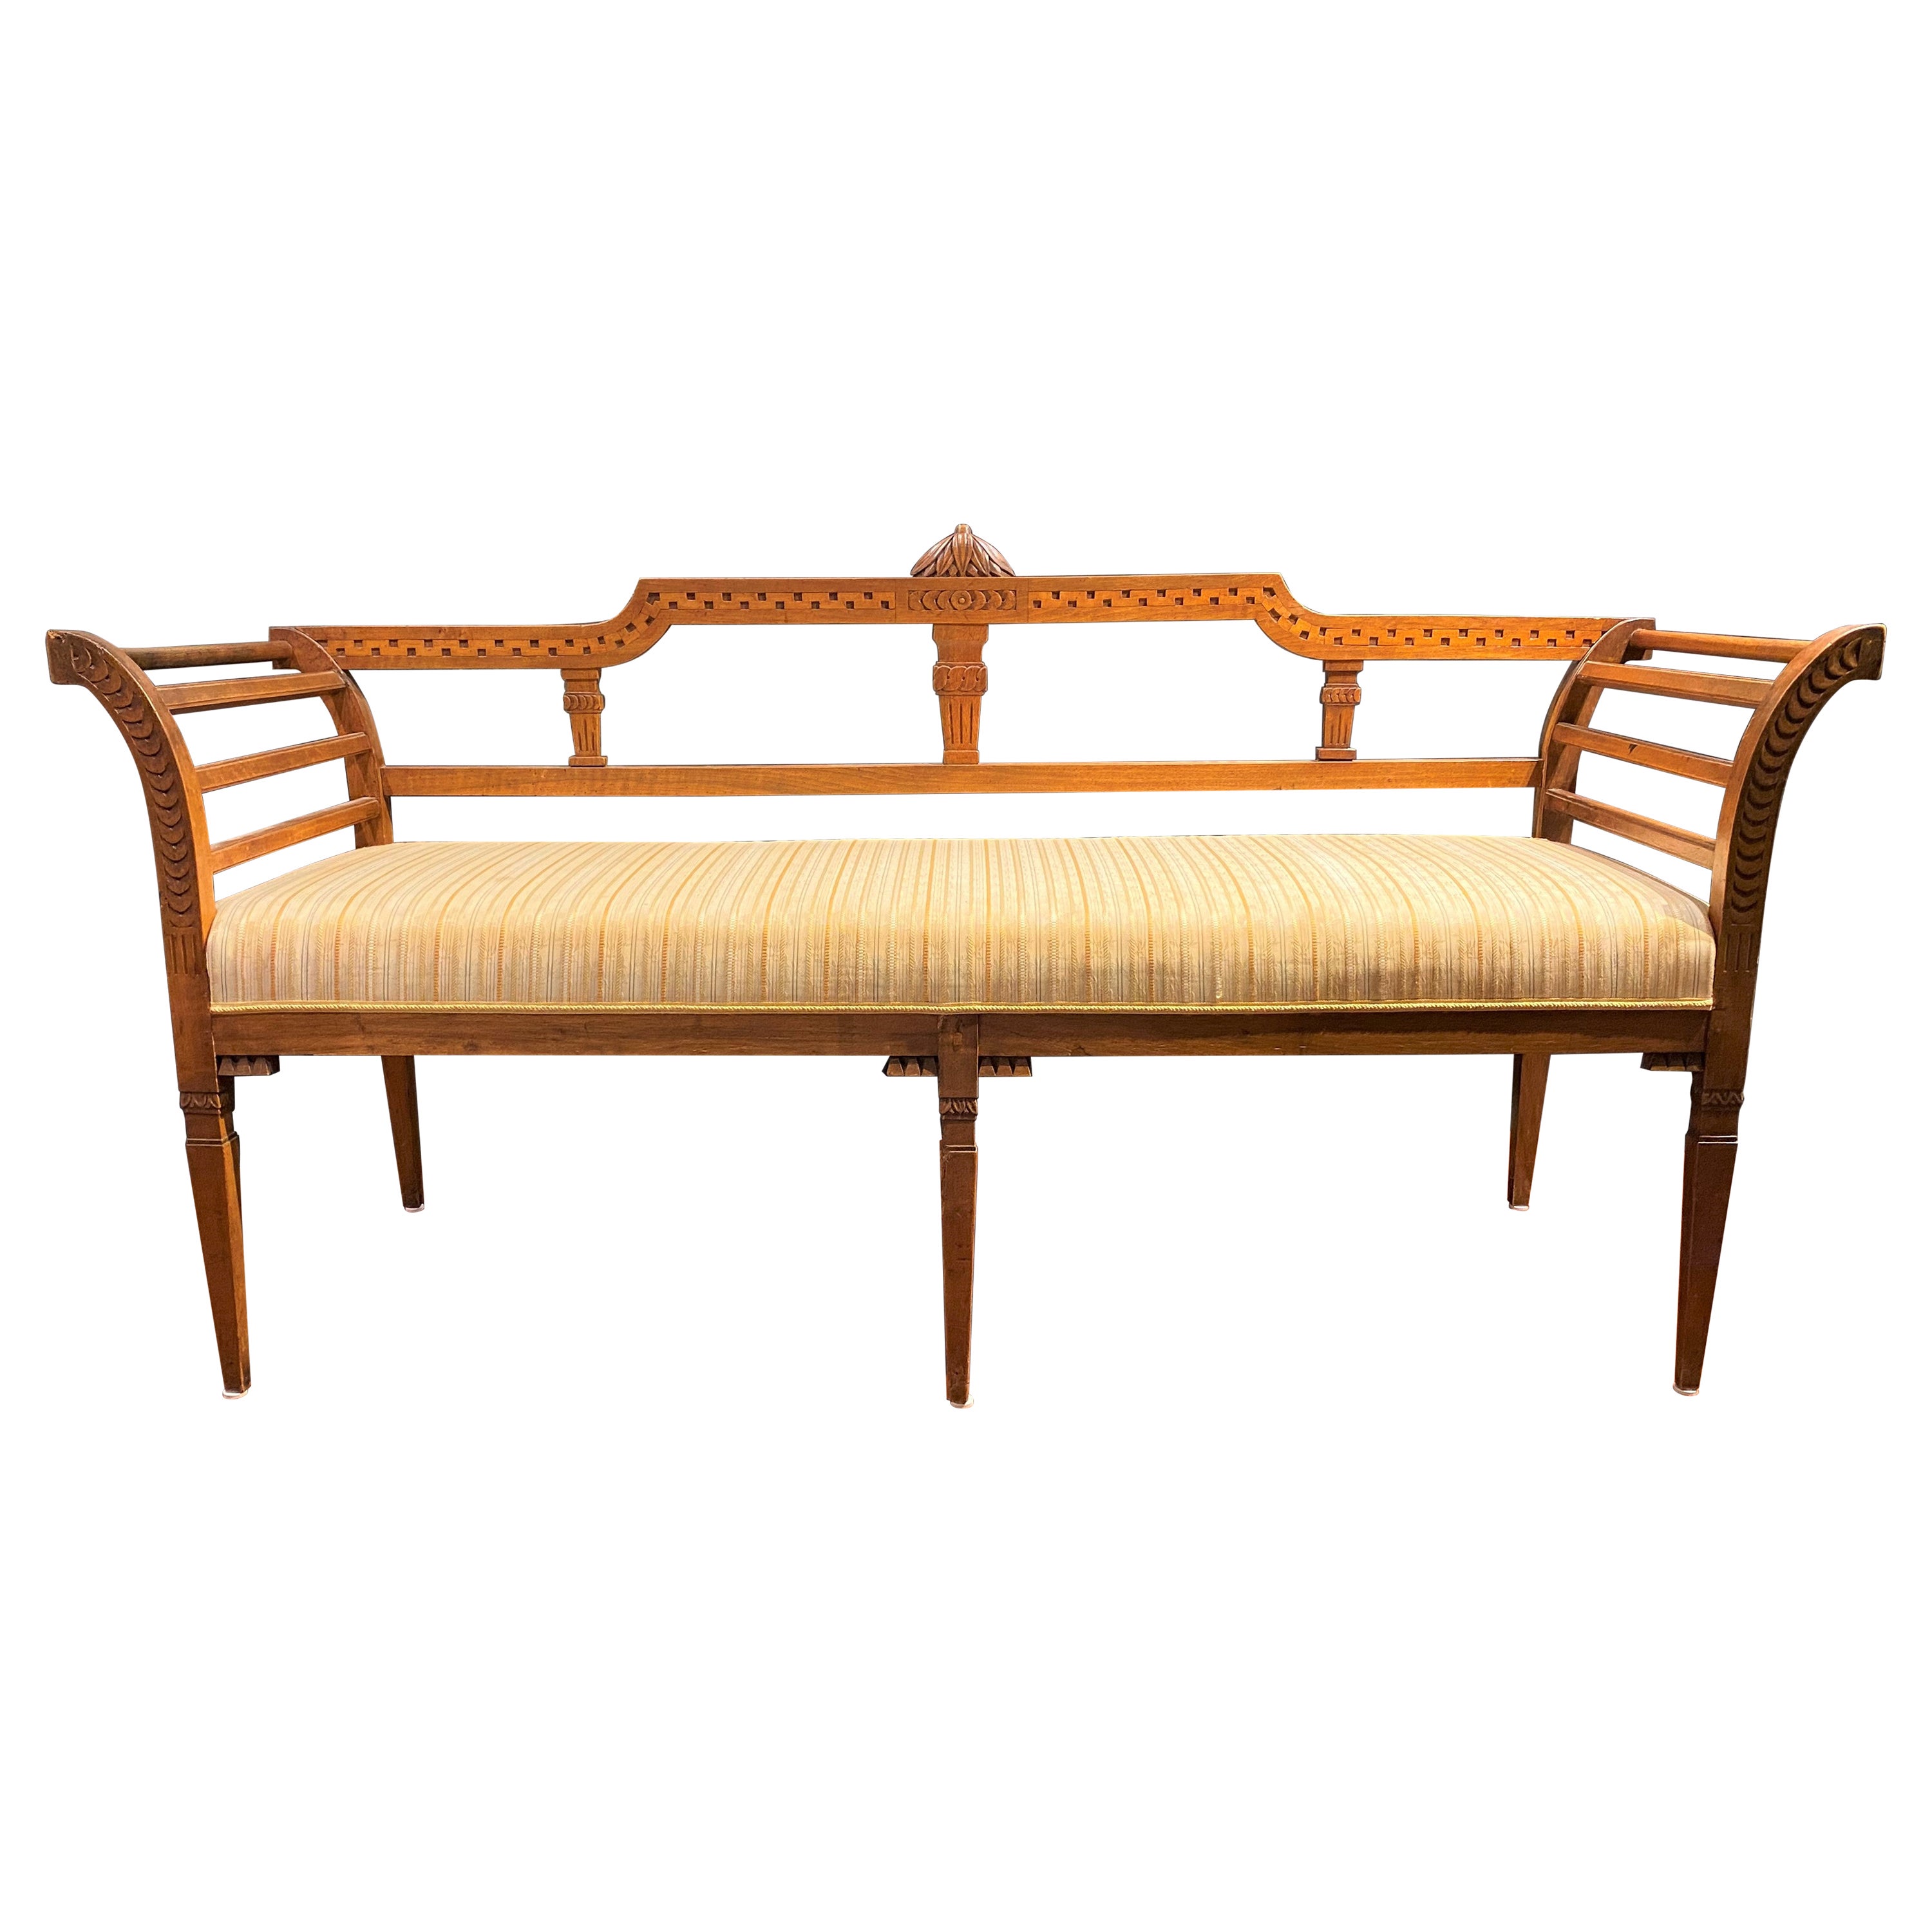 Early 19th Century Austrian Upholstered Settee with Nicely Carved Elements For Sale